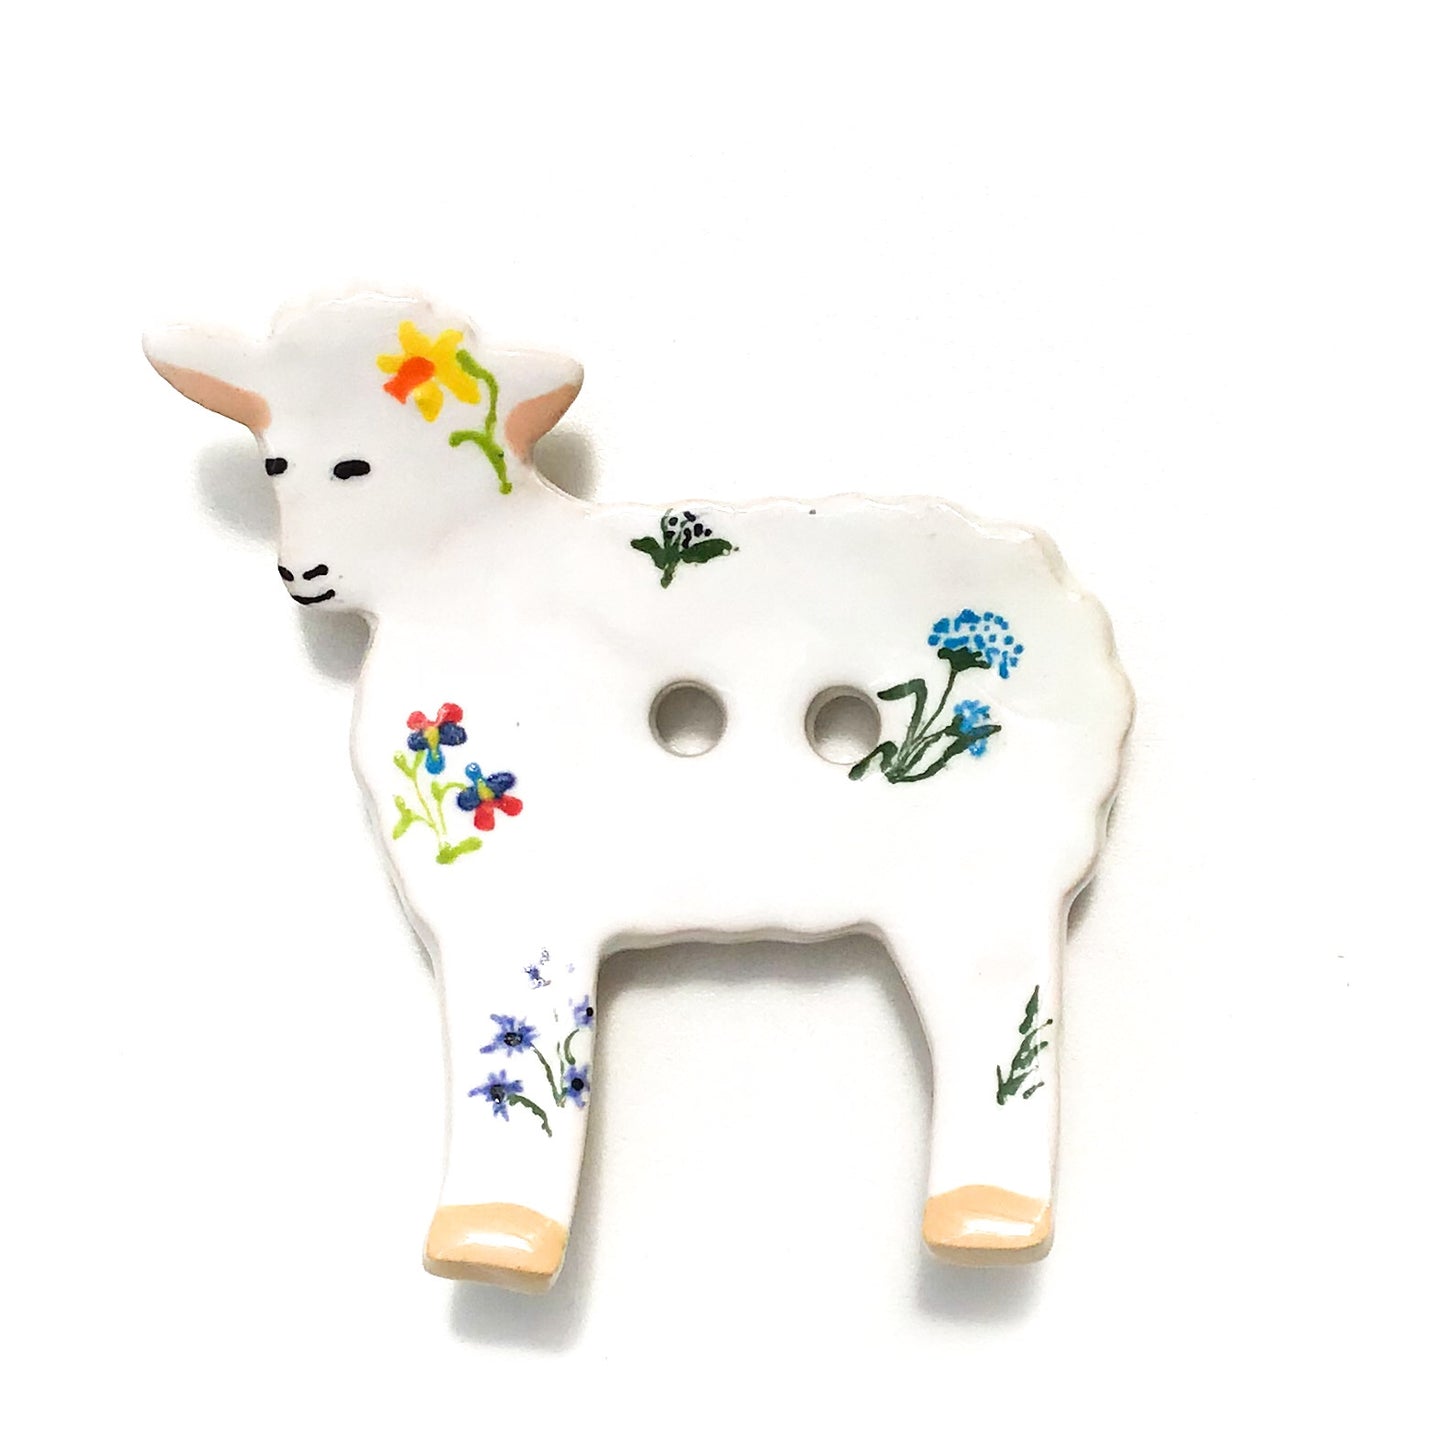 Sheep with Flowers Ceramic Soap Dish - Pottery Soap Dish - 3 1/2" x 3 3/4"